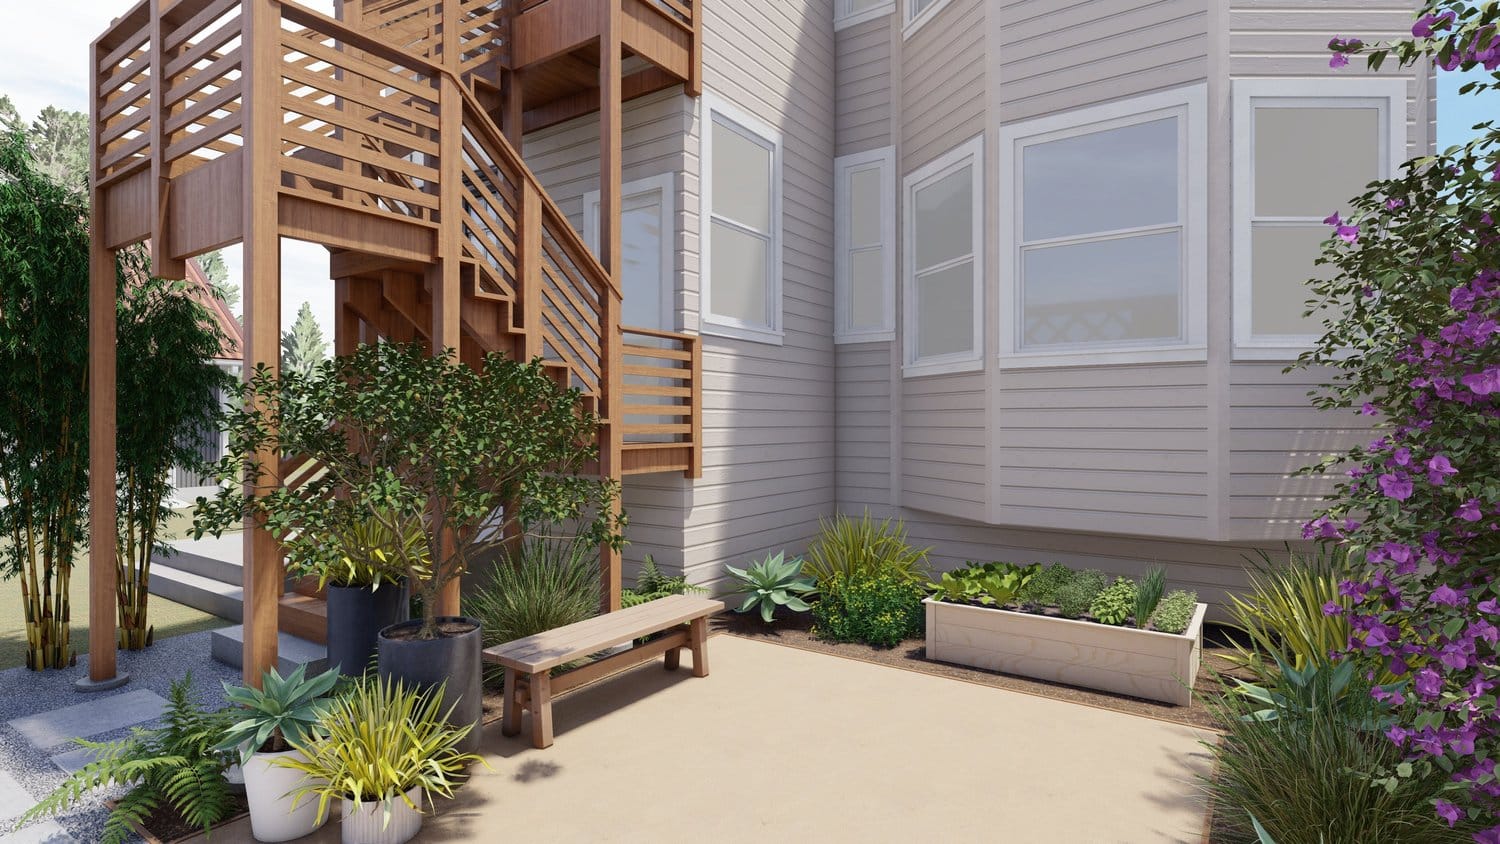 San Francisco side yard garden with bench and planters